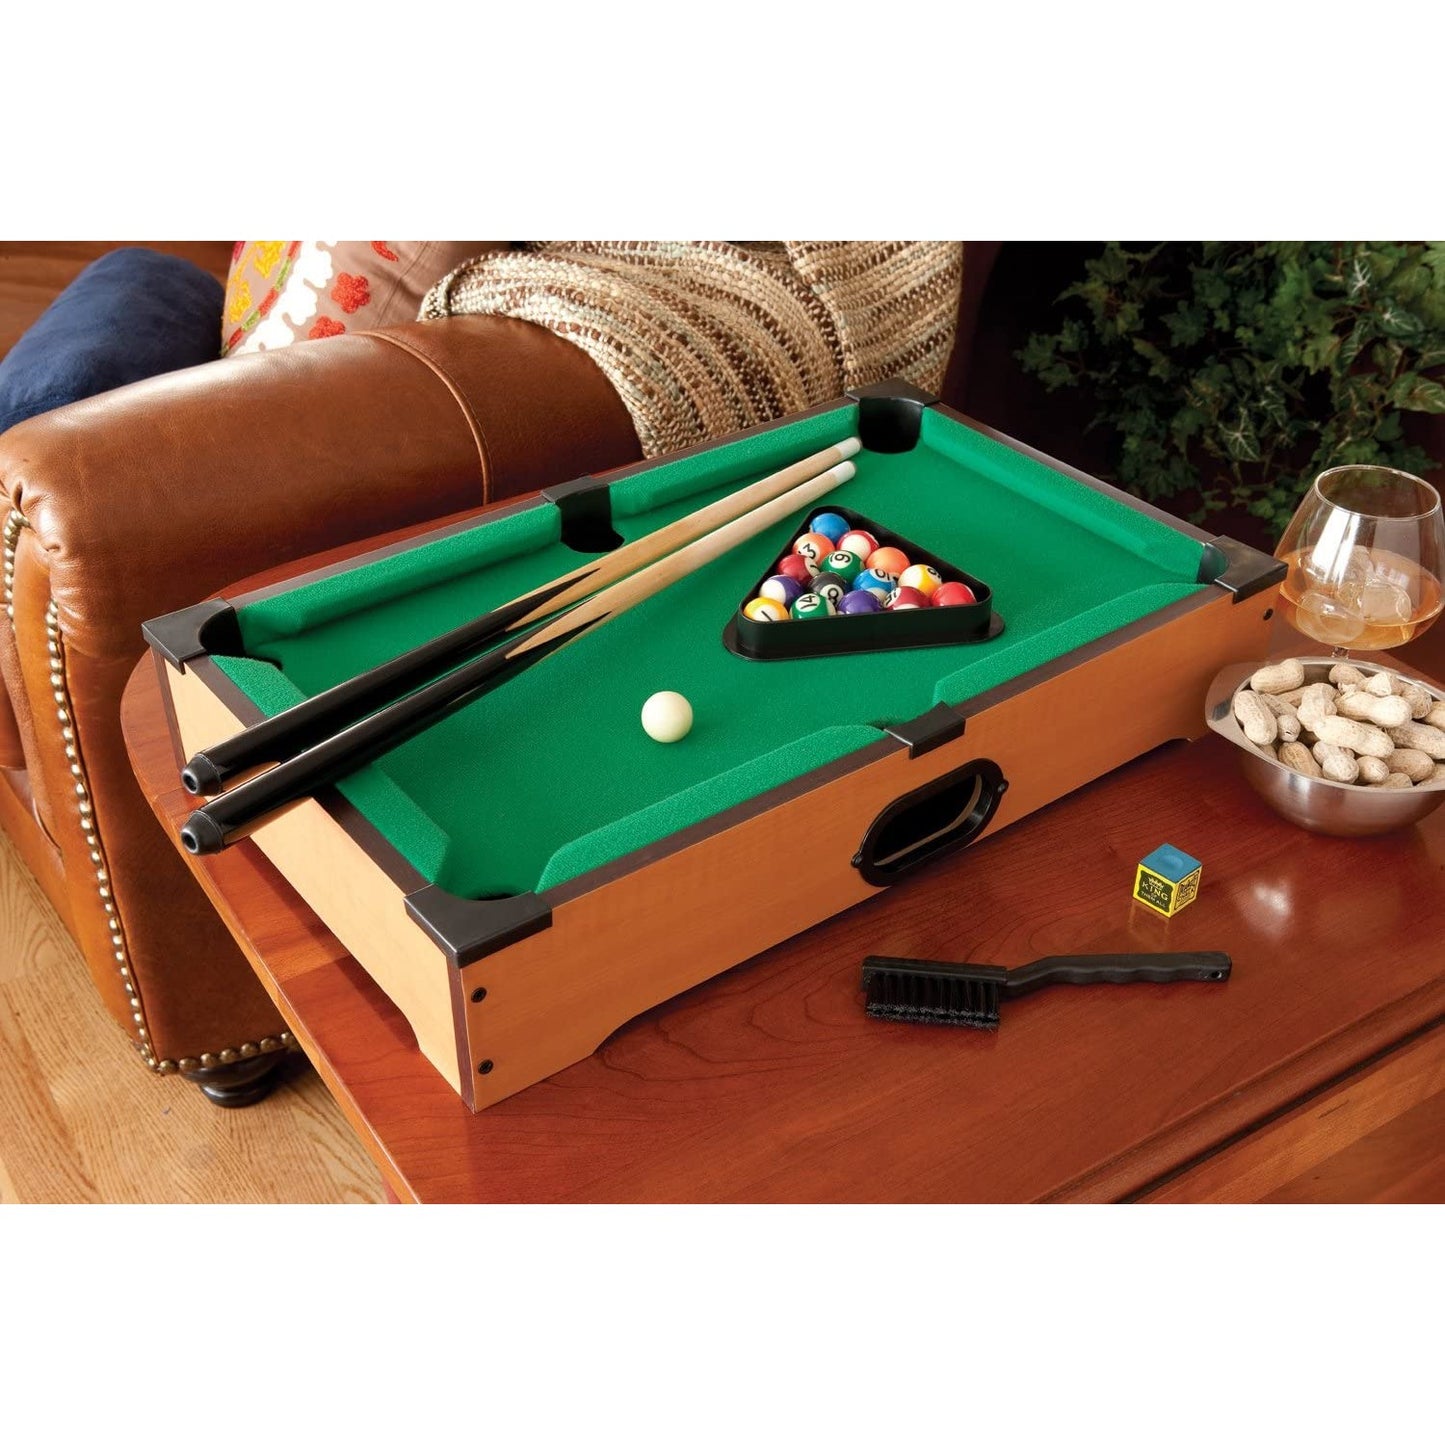 A miniature table-top pool game set sitting on a small side table.